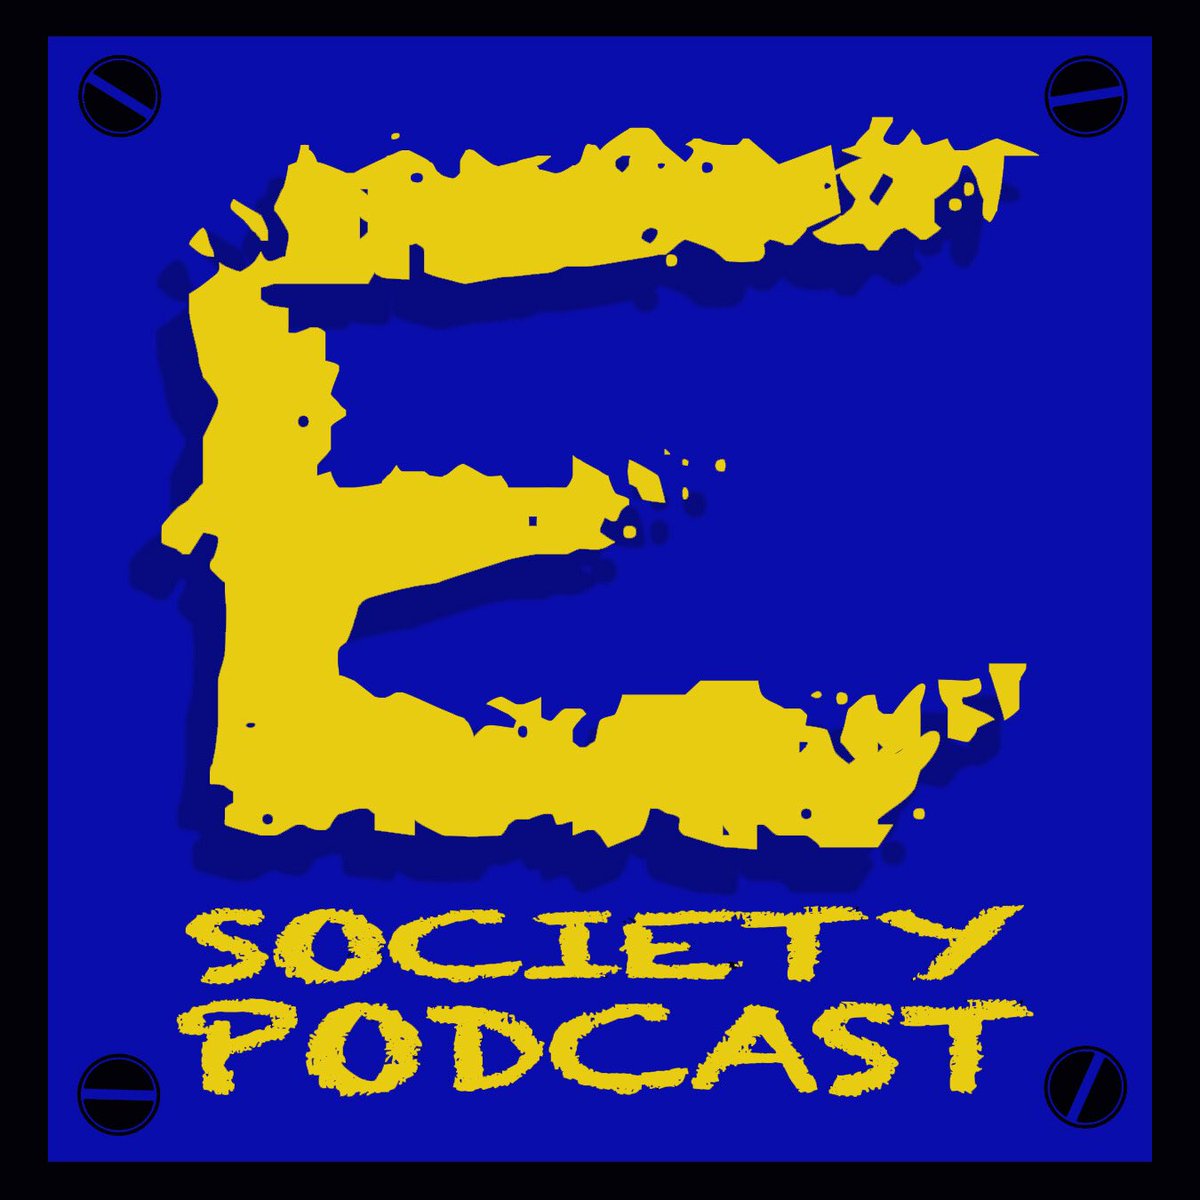 #ESP: Zissiou’s 2000’s Hip Hop Study Group Part 1 Is Now Available At podcasters.spotify.com/pod/show/esoc. #SK8ERNezPodcastNetwork #ESociety #Movies #TVShows #Comics #Collectibles #Music #Entertainment #PopCulture #Podcast #Podcasting #PodLife #PodernFamily #PodcastHQ #2000sHipHop #HipHop